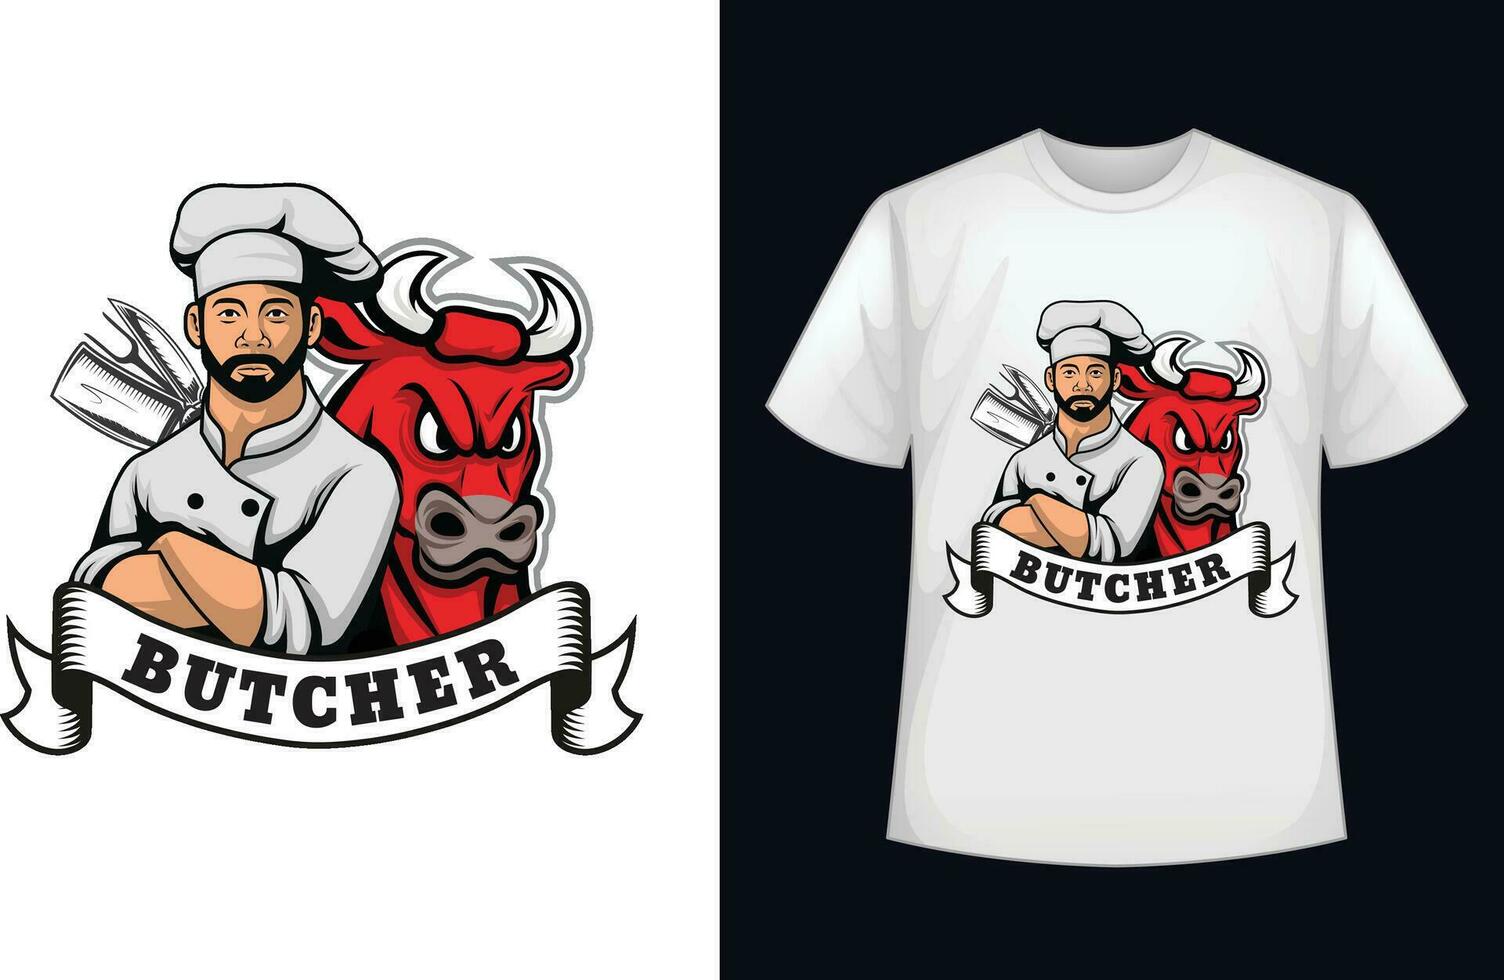 butcher t-shirt design with chef vector